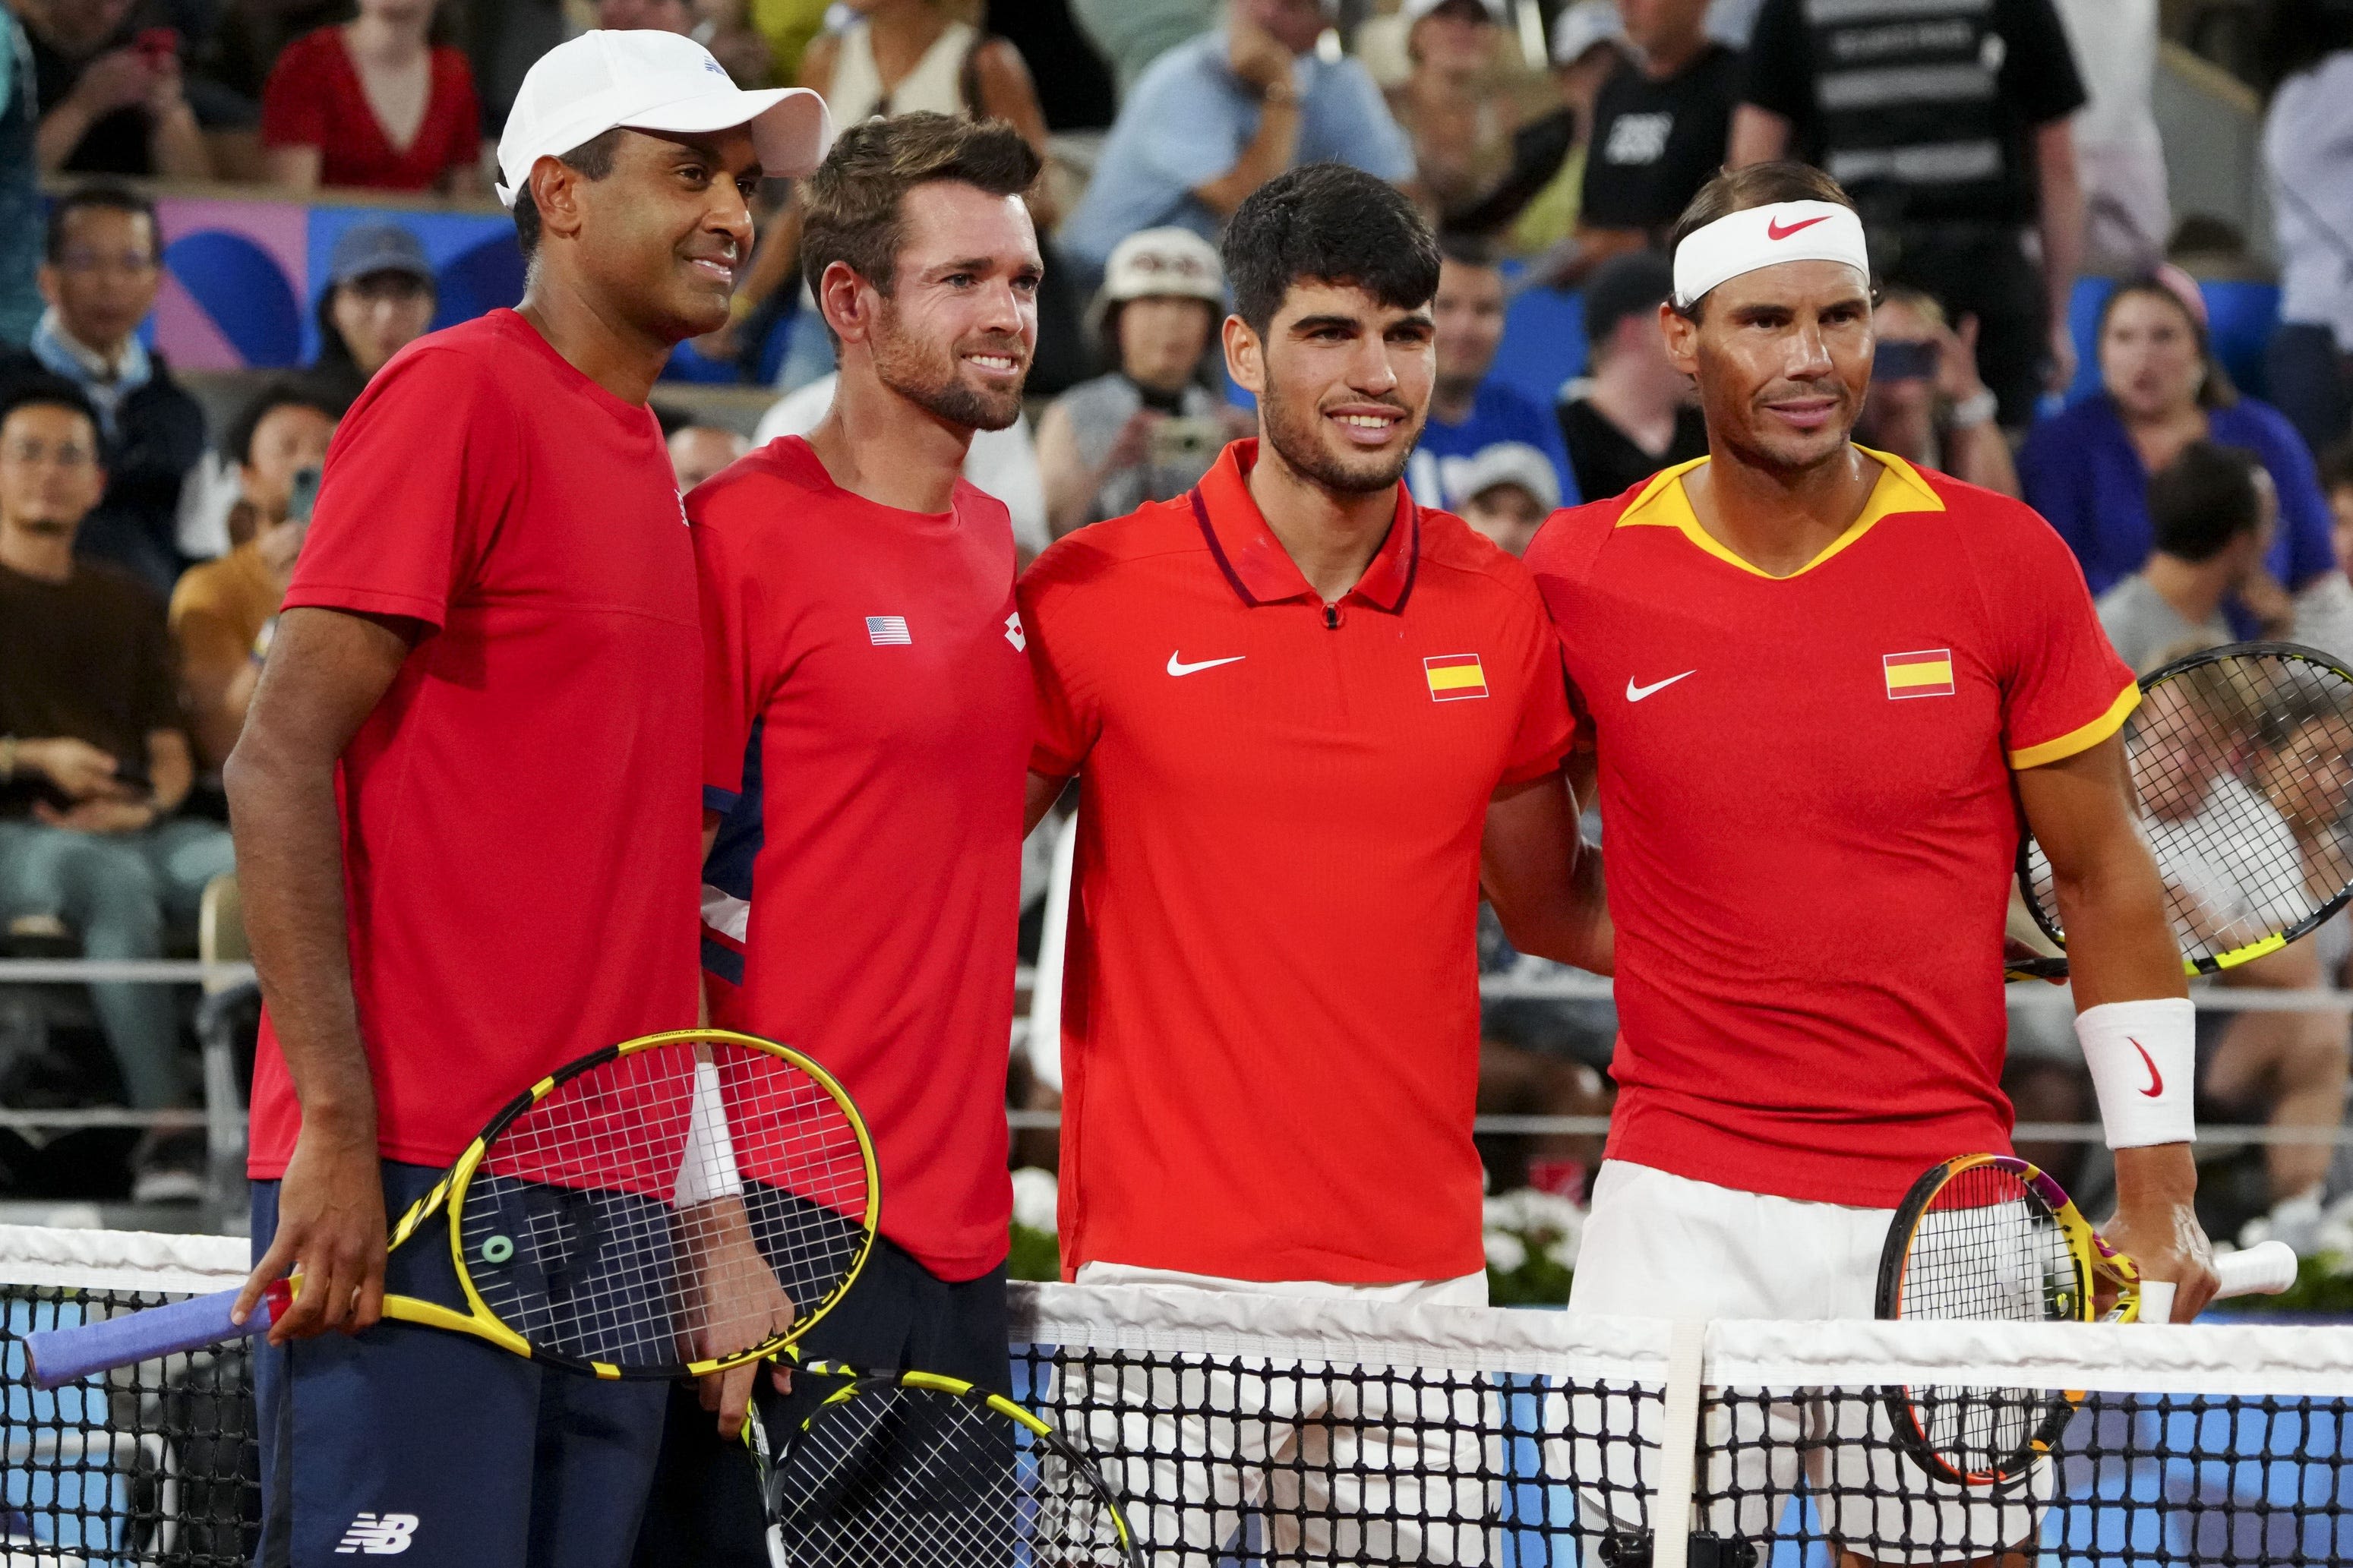 Alcaraz and Nadal fall to Americans in Olympic tennis doubles, social media reacts